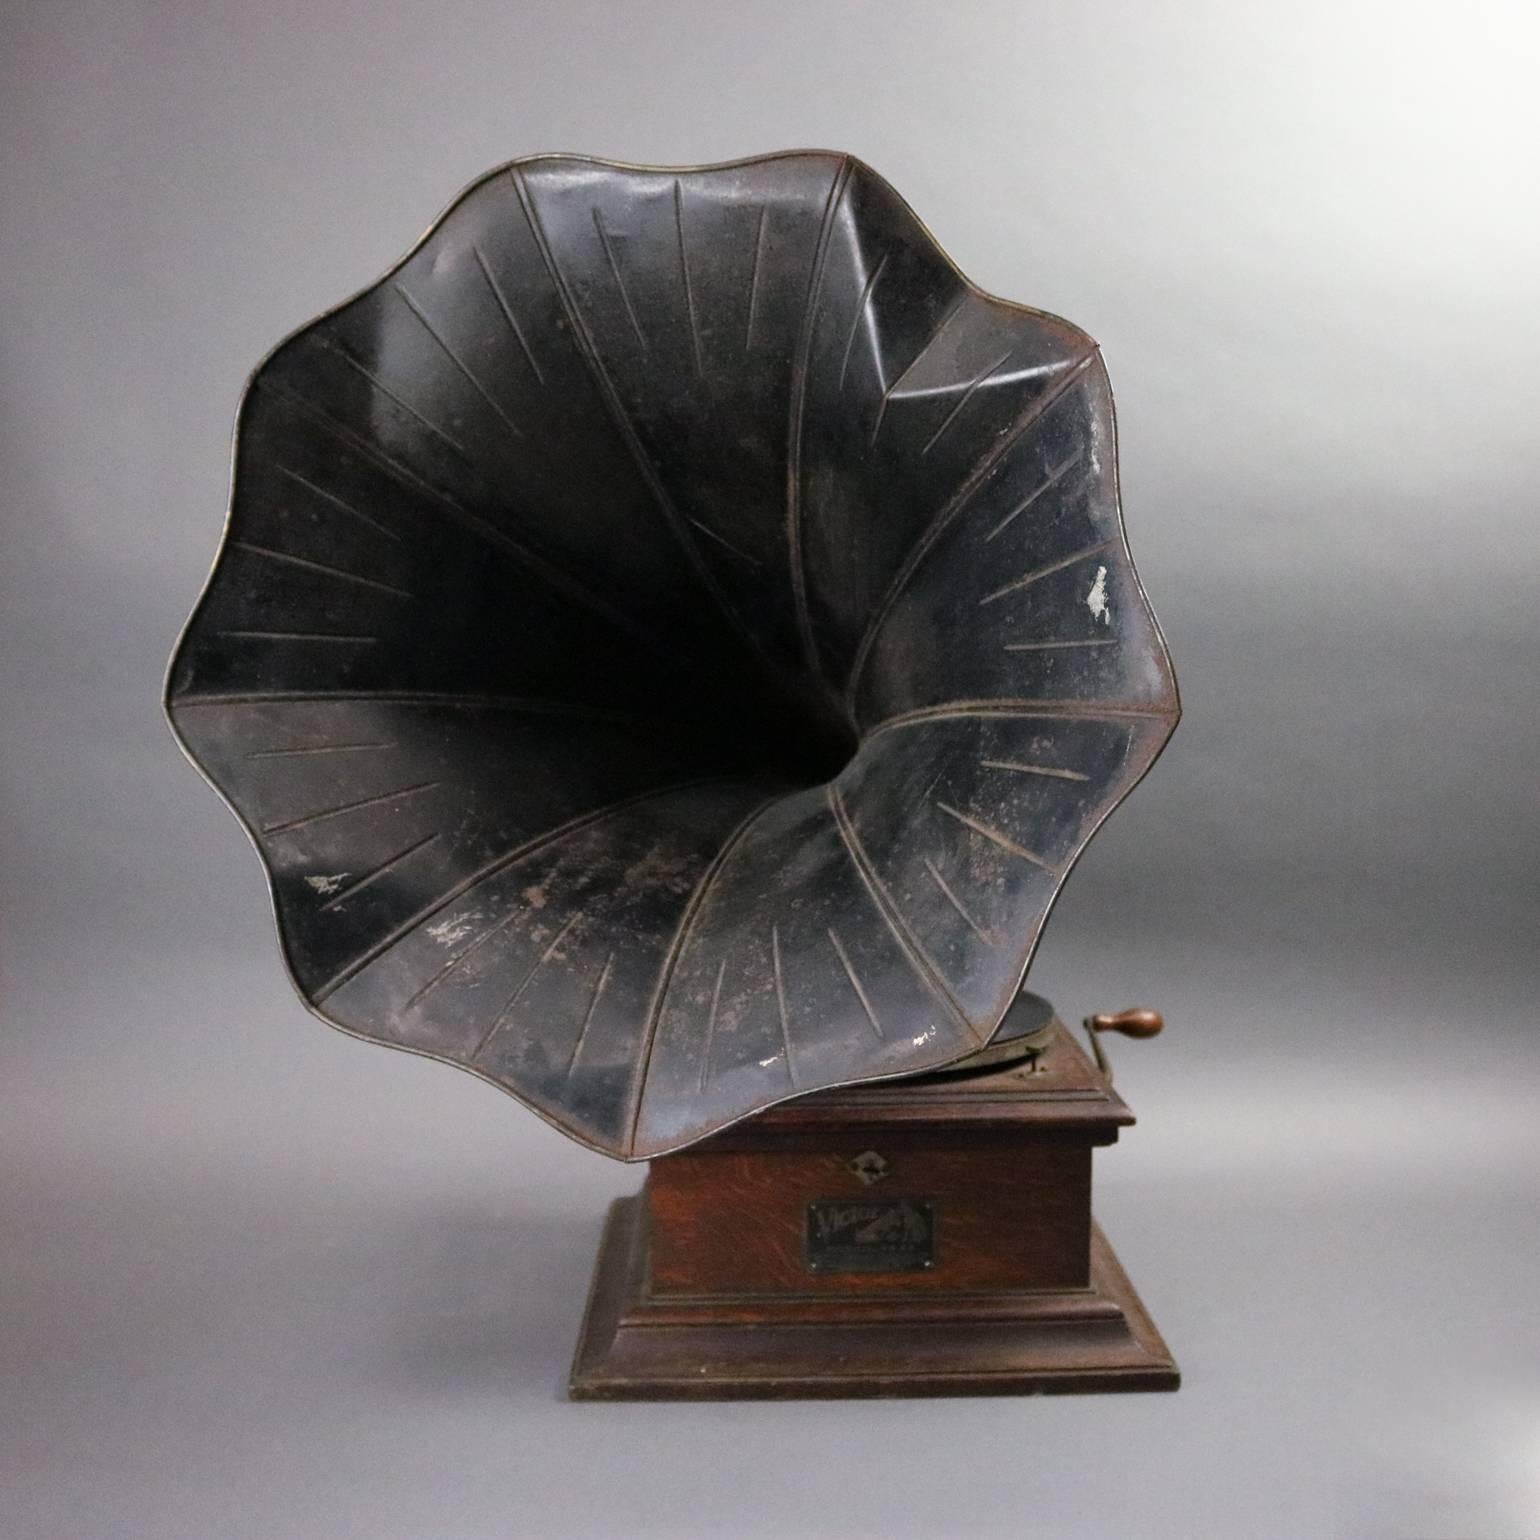 Antique Victor Victrola phonograph features oak case with gilt banded external tin horn, original label and plate, in working order, circa 1900

Measures: 27